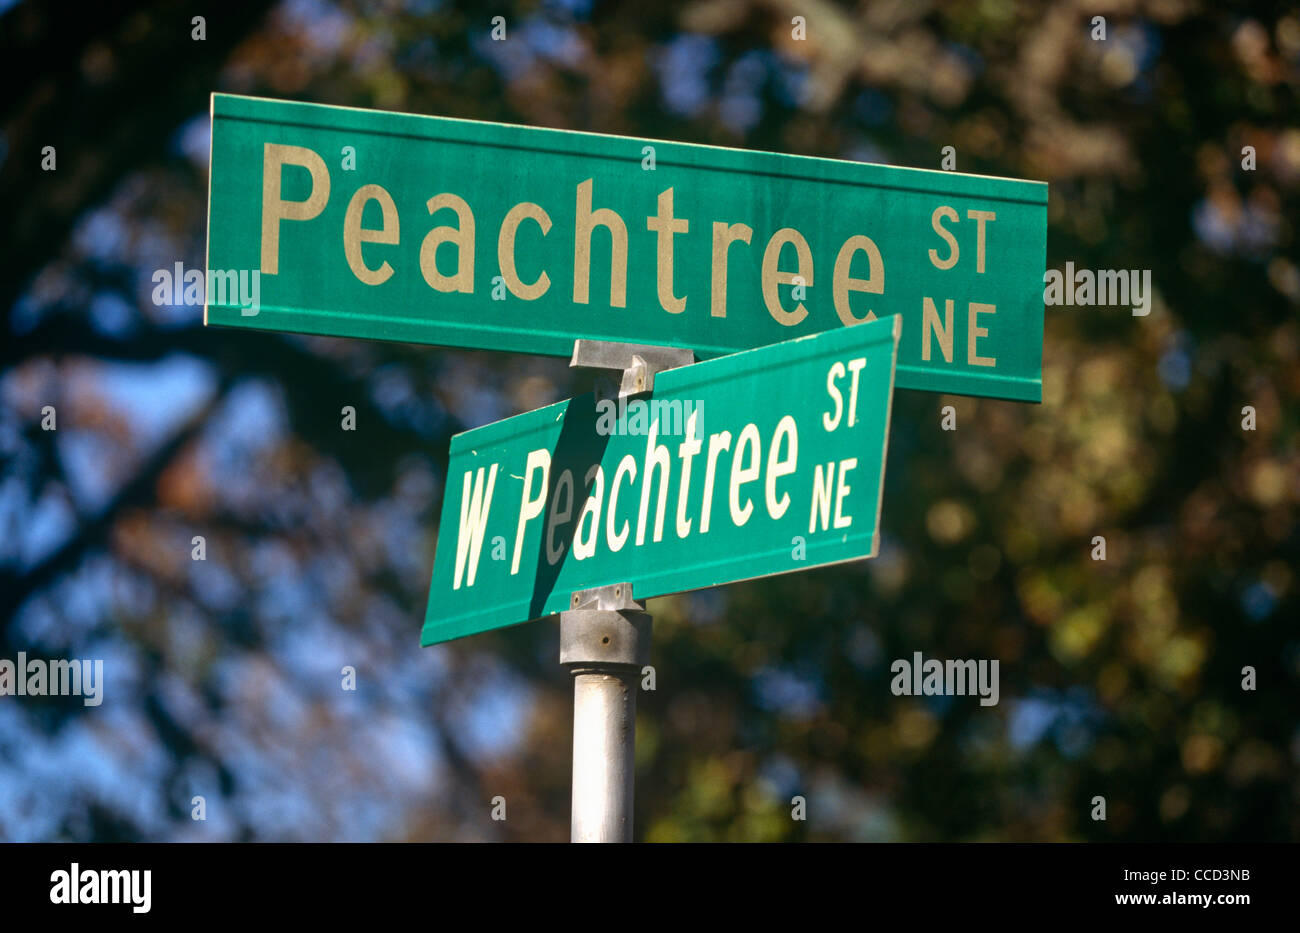 https://c8.alamy.com/comp/CCD3NB/a-confusing-pair-of-street-signs-showing-two-of-the-71-peachtree-street-CCD3NB.jpg